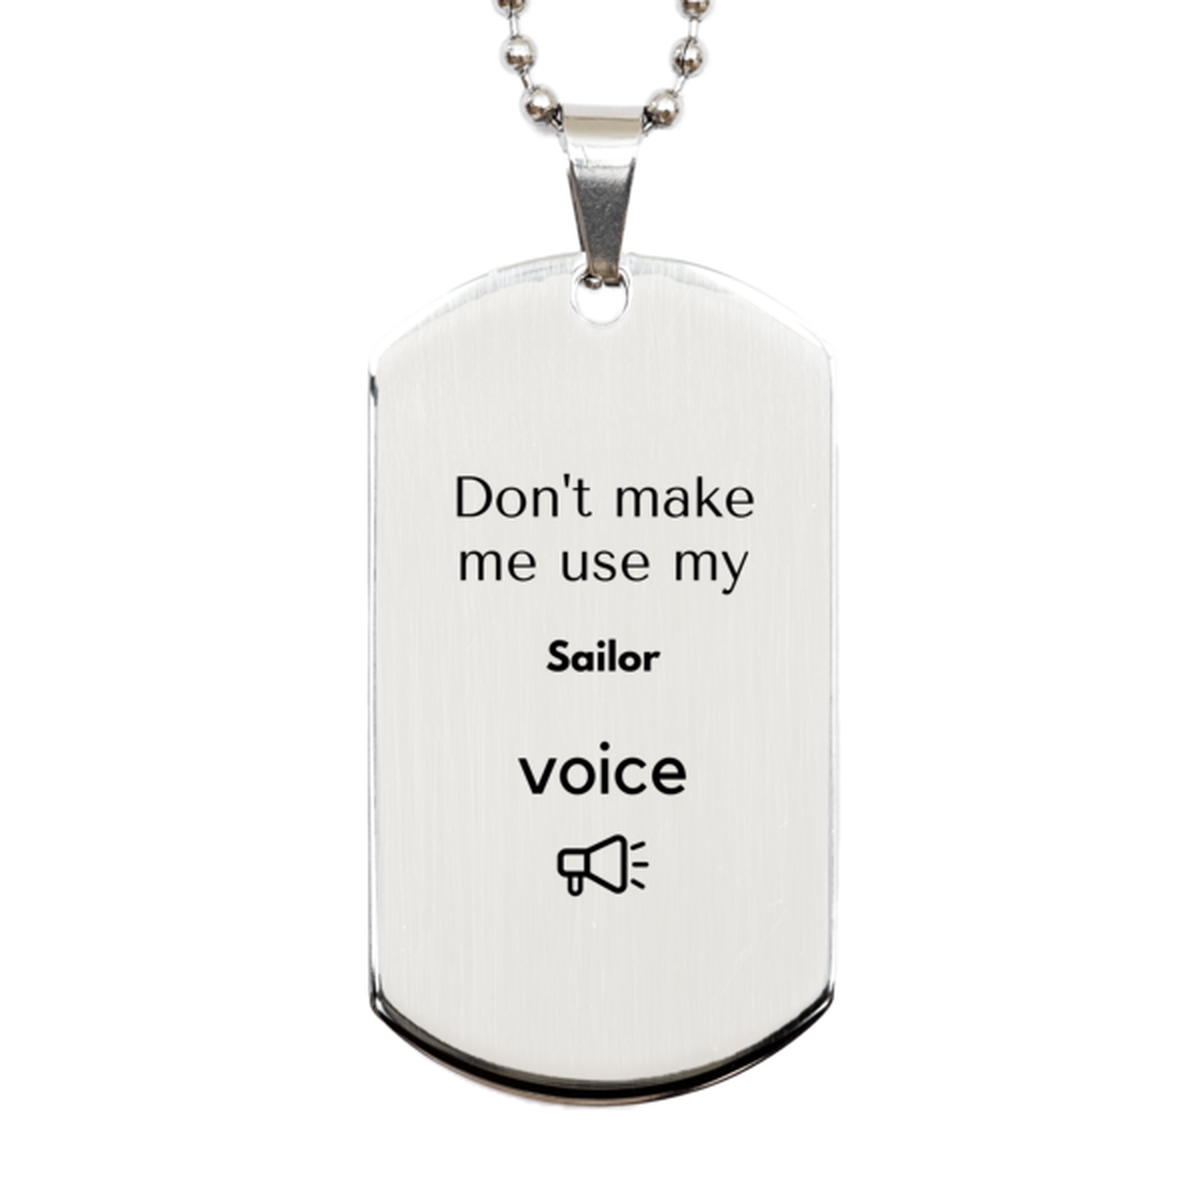 Don't make me use my Sailor voice, Sarcasm Sailor Gifts, Christmas Sailor Silver Dog Tag Birthday Unique Gifts For Sailor Coworkers, Men, Women, Colleague, Friends